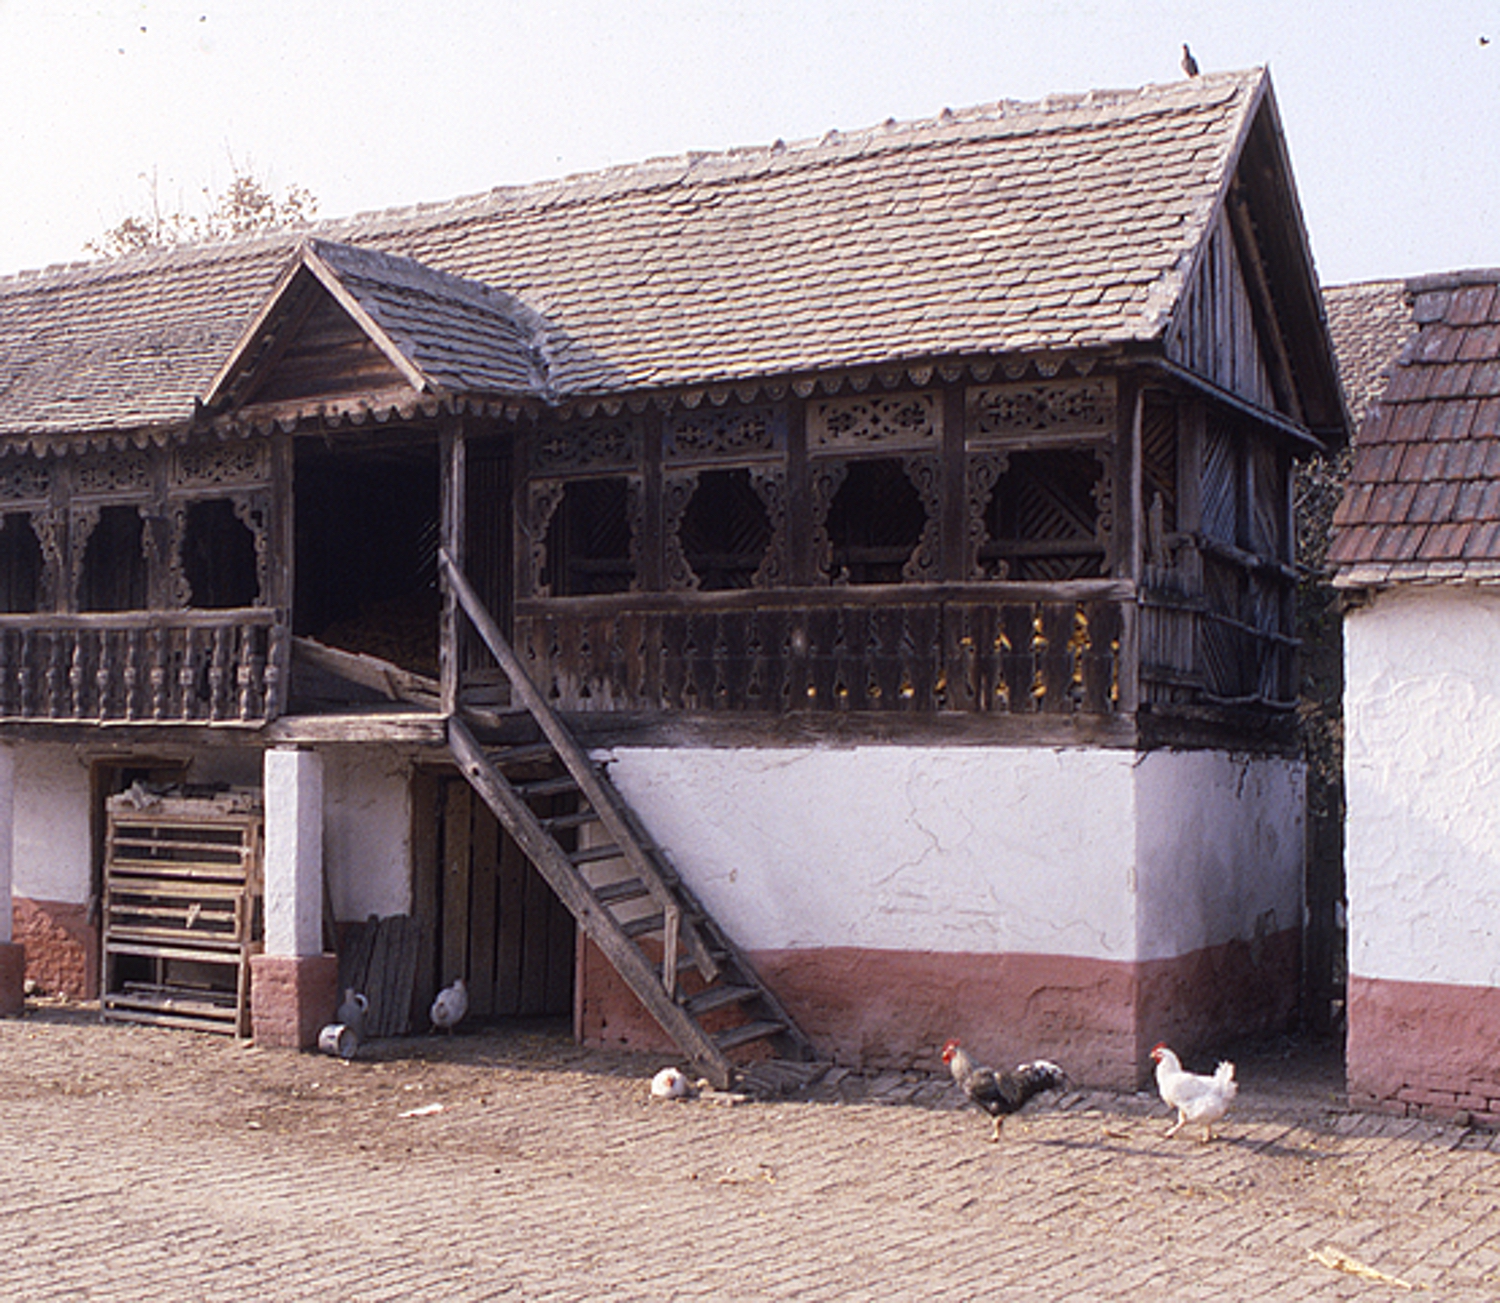 <p>Behind the gates and the village street outside, the wooden ambar (granary) and koš (corncrib) sit over a masonry base where poultry, tools and equipment are kept. The lower level is constructed of soft bricks covered with a plaster coating and painted to accent the base. The roof is wood-framed and covered with clay tiles.</p>